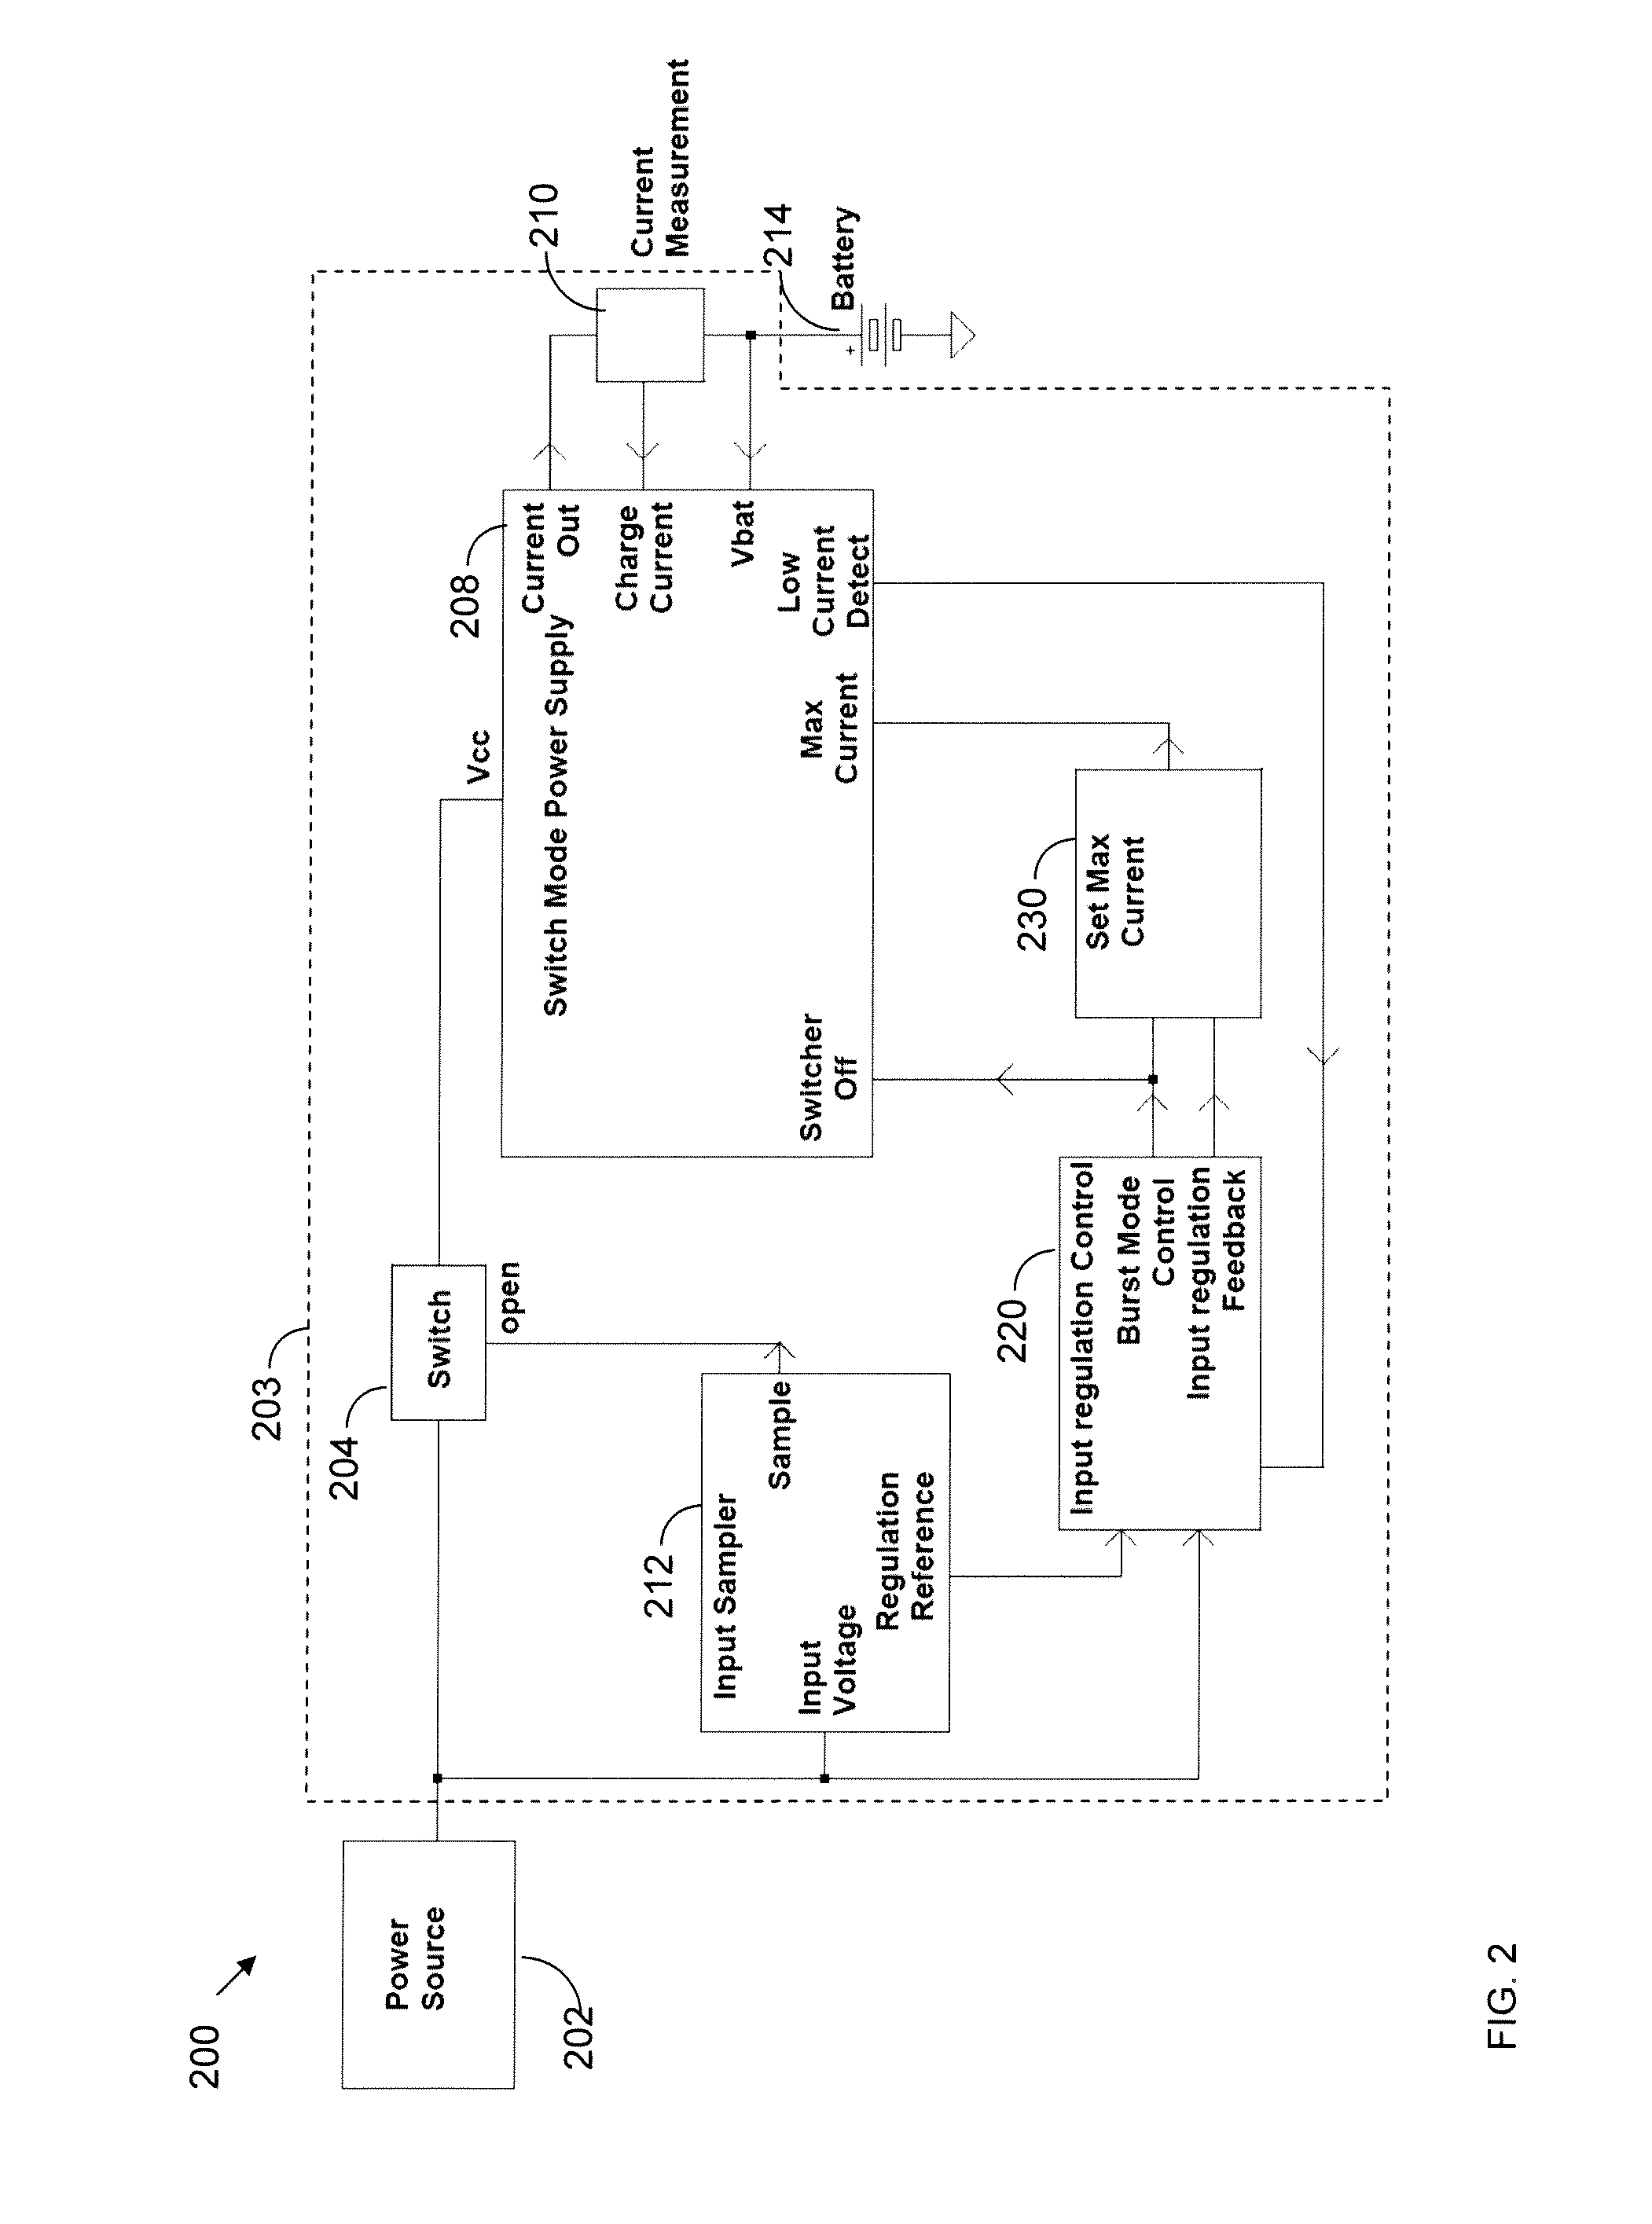 System and method for input voltage regulation of switch mode supplies implementing burst mode operation